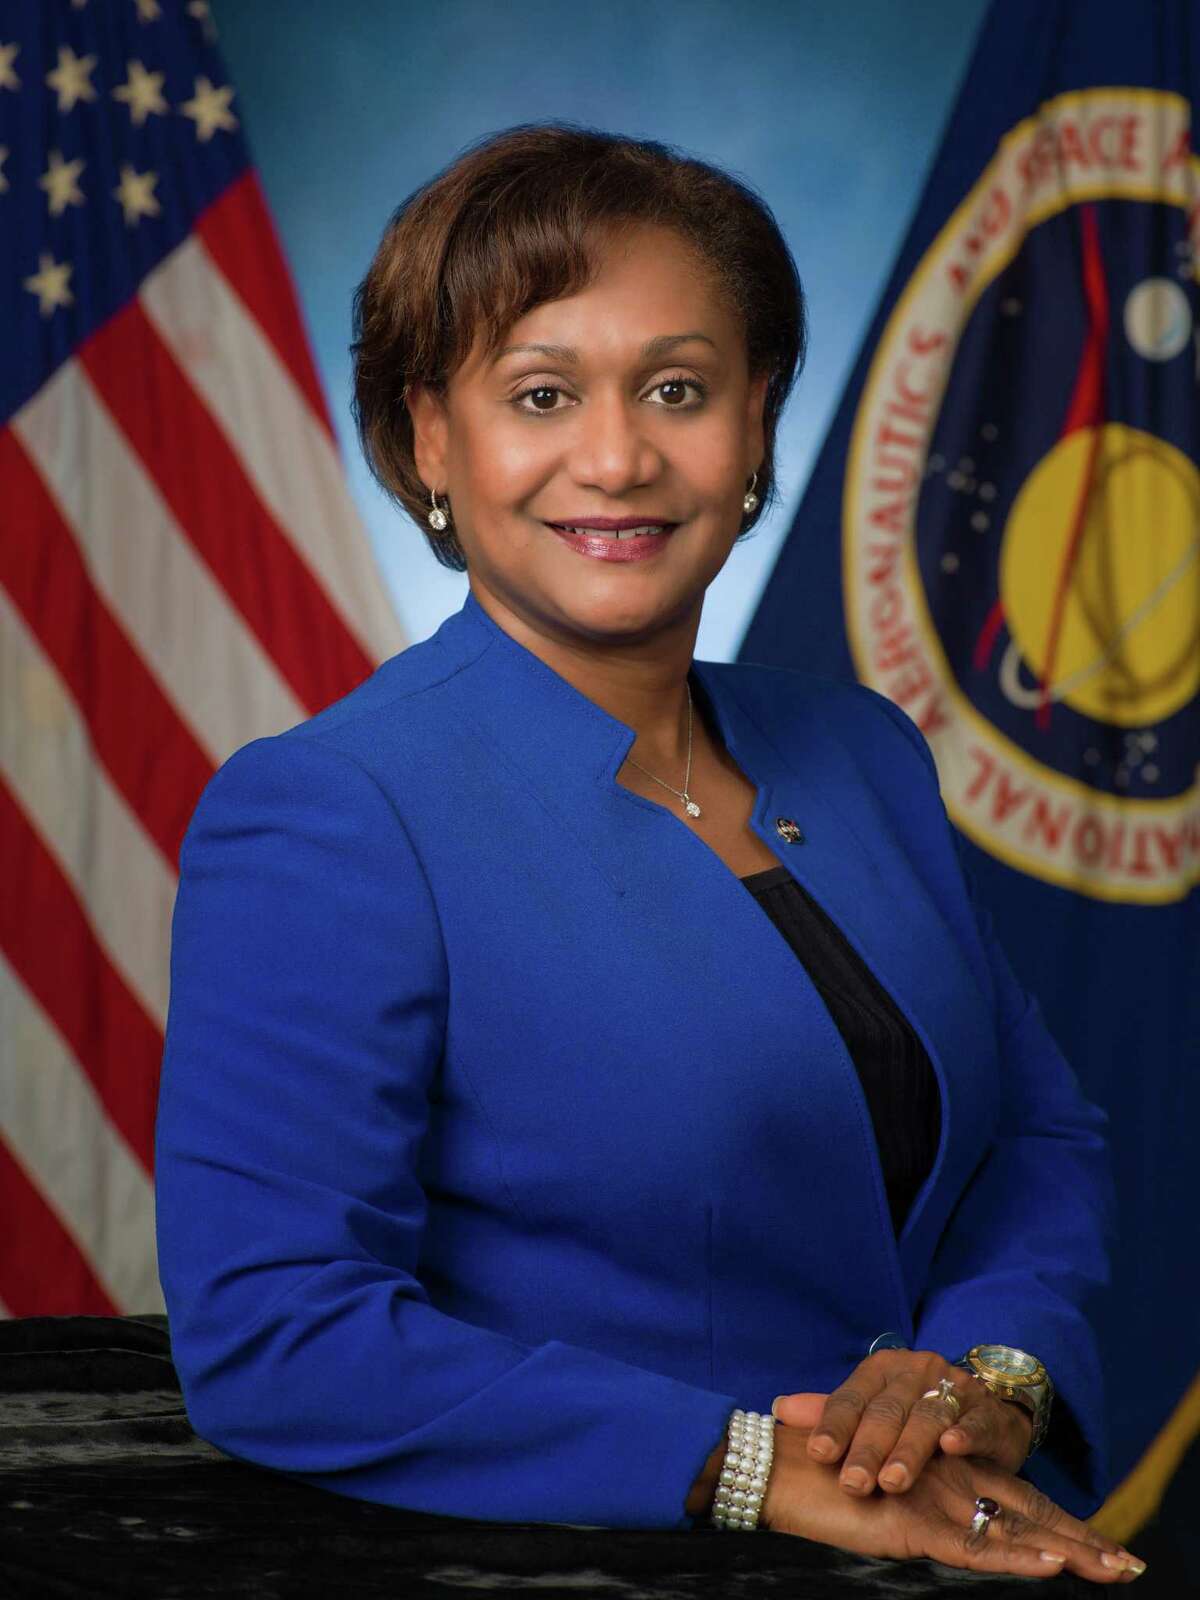 PHOTOS: JOHNSON SPACE CENTER Vanessa Wyche was named new deputy director of NASA's Johnson Space Center in Houston. >>See how the center has changed over the decades...